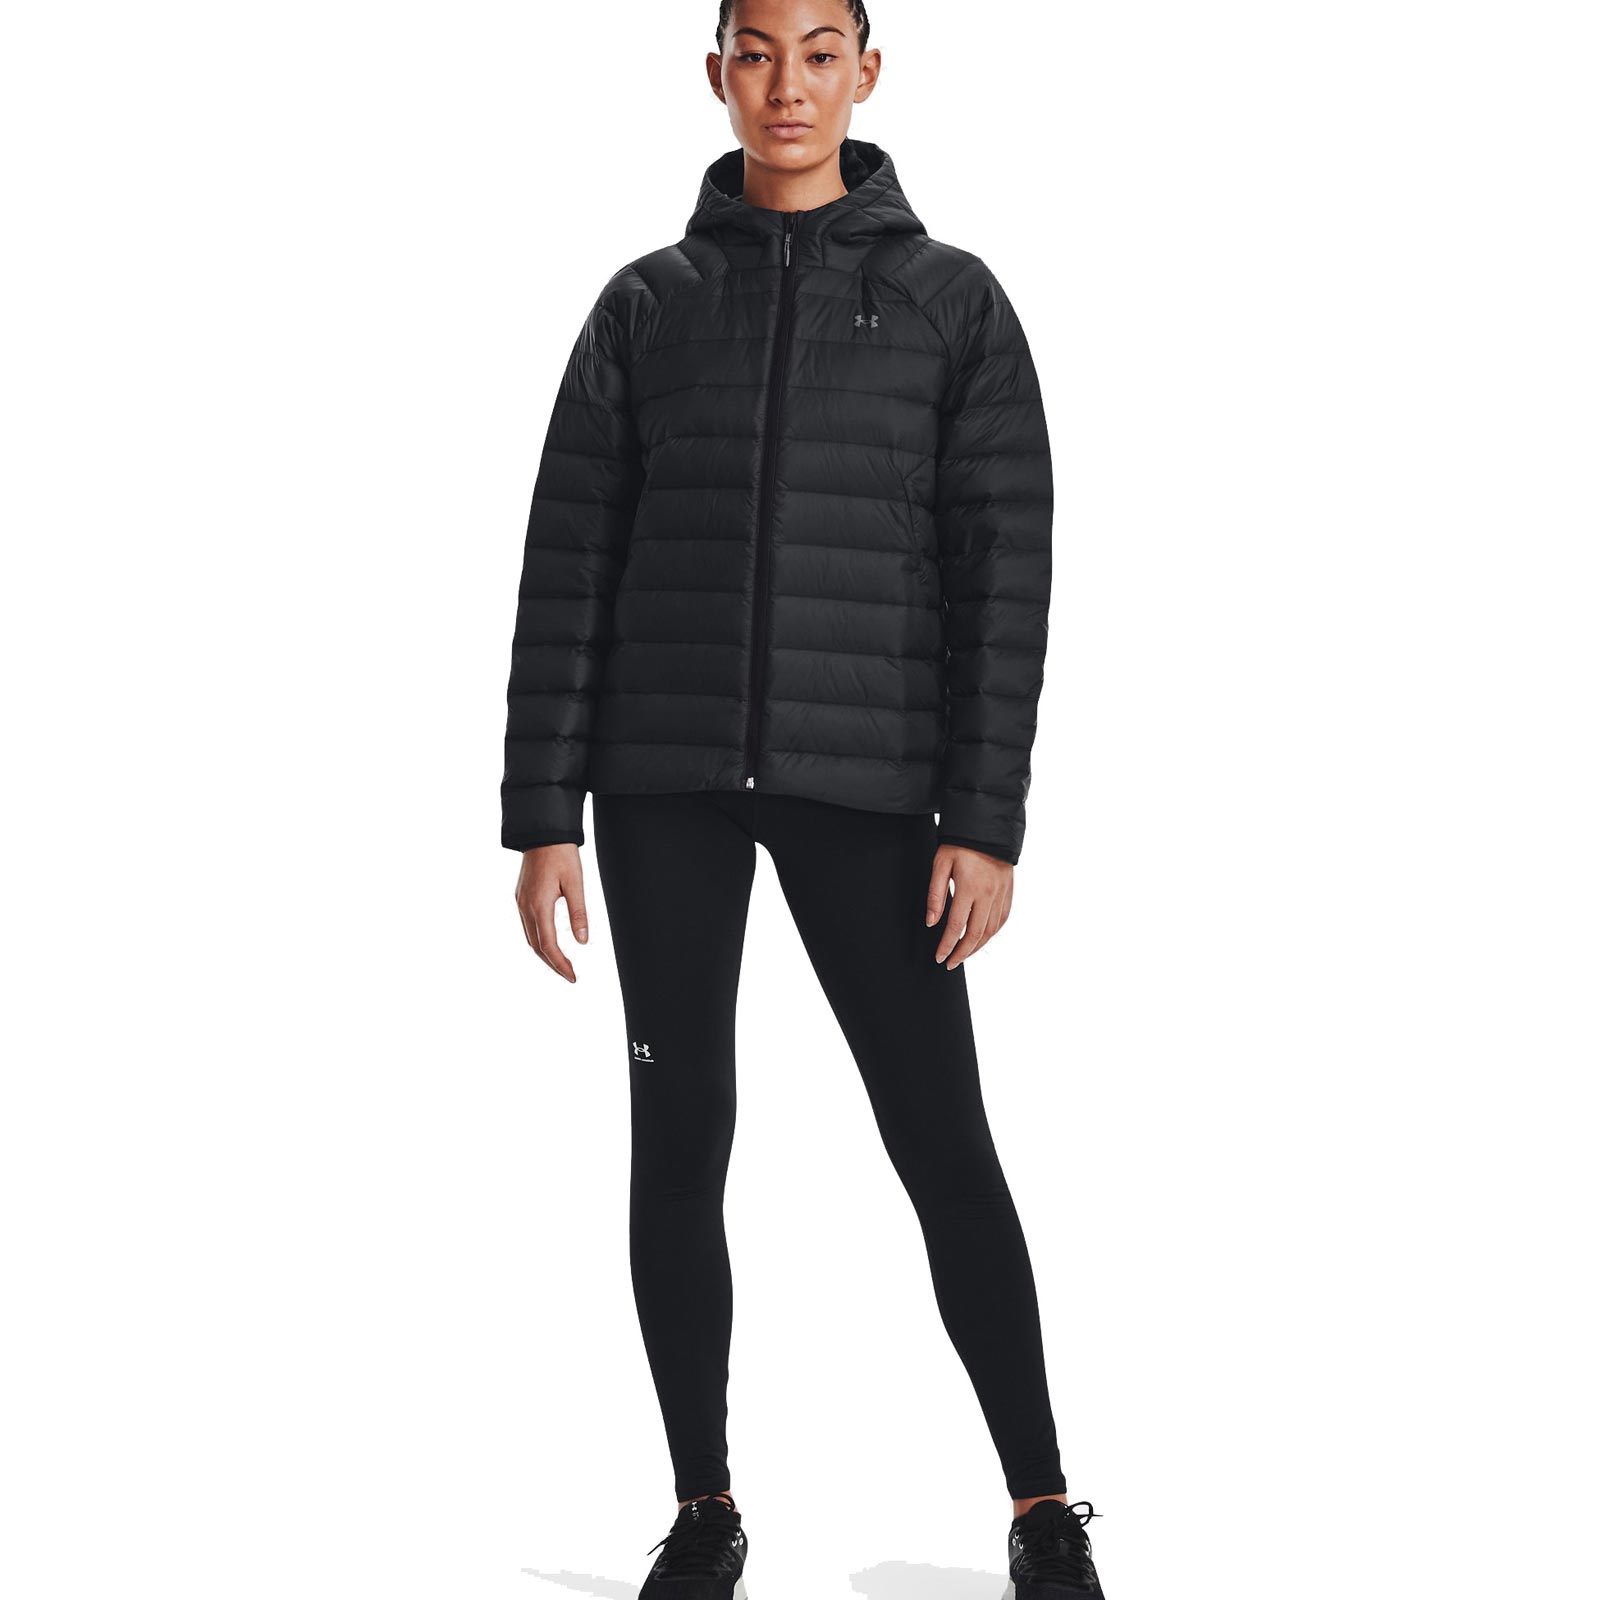 UNDER ARMOUR STORM ARMOUR DOWN 2.0 WOMENS JACKET